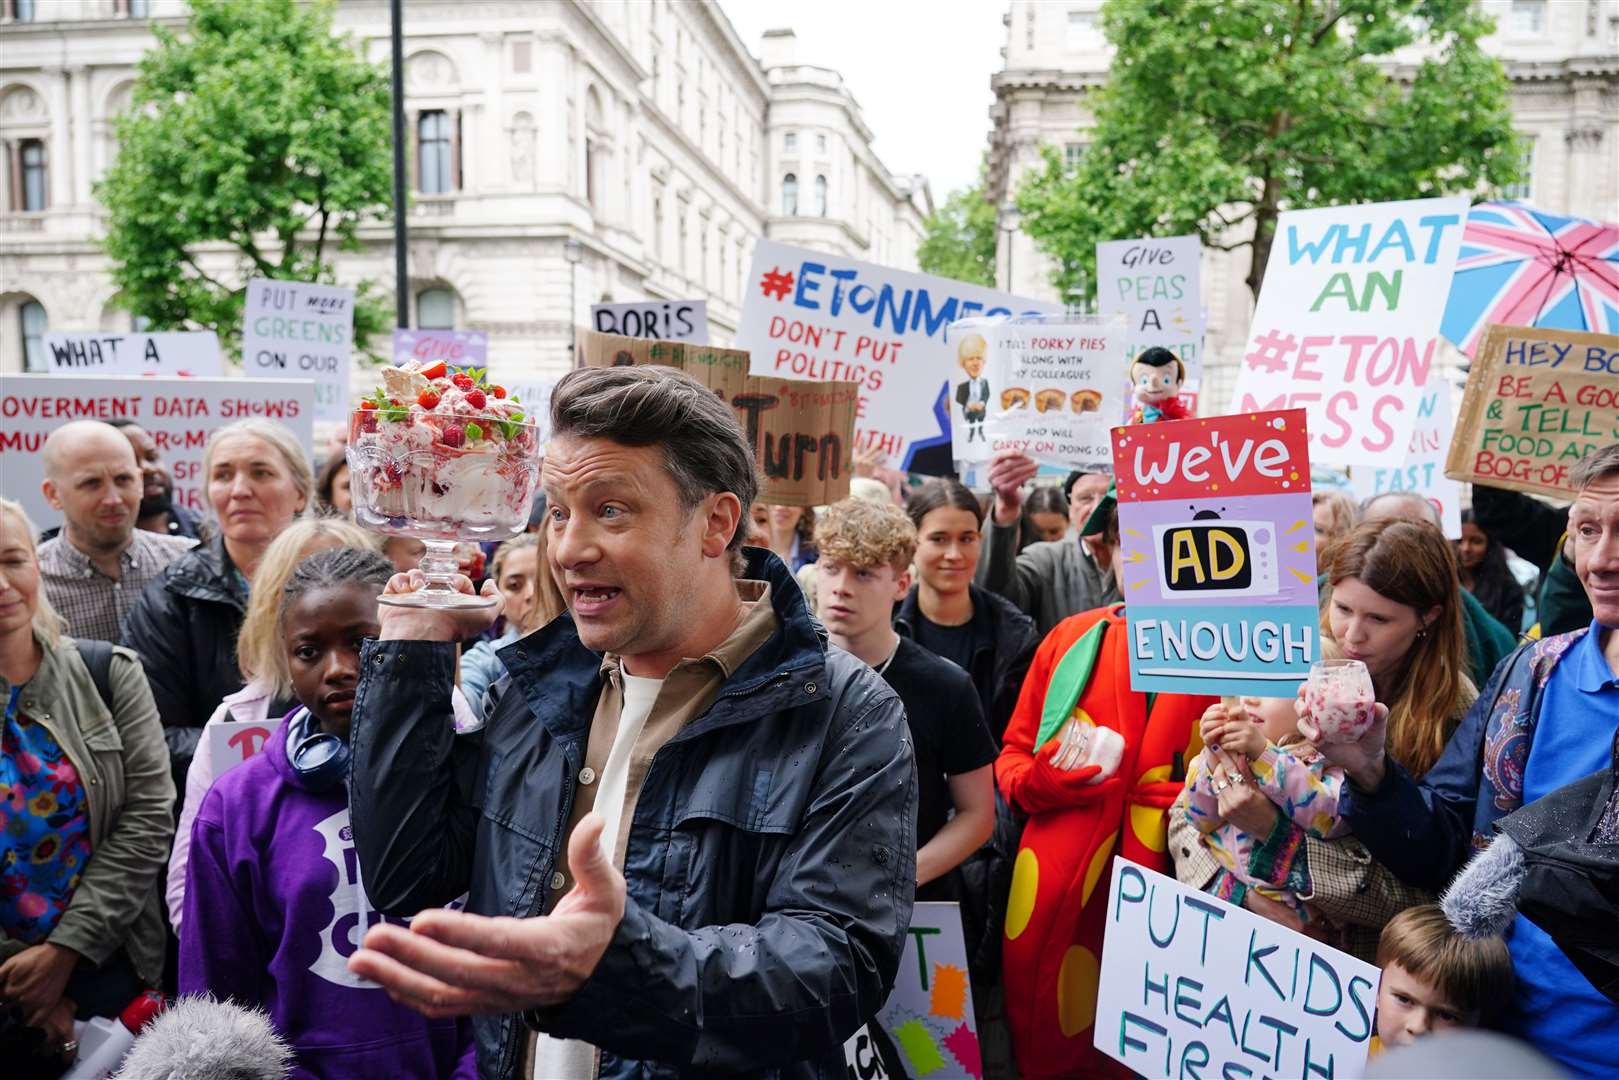 Chef Jamie Oliver takes part in the What An Eton Mess demonstration outside Downing Street, calling for Boris Johnson to reconsider his U-turn on the Government’s anti-obesity strategy (Dominic Lipinski/PA)